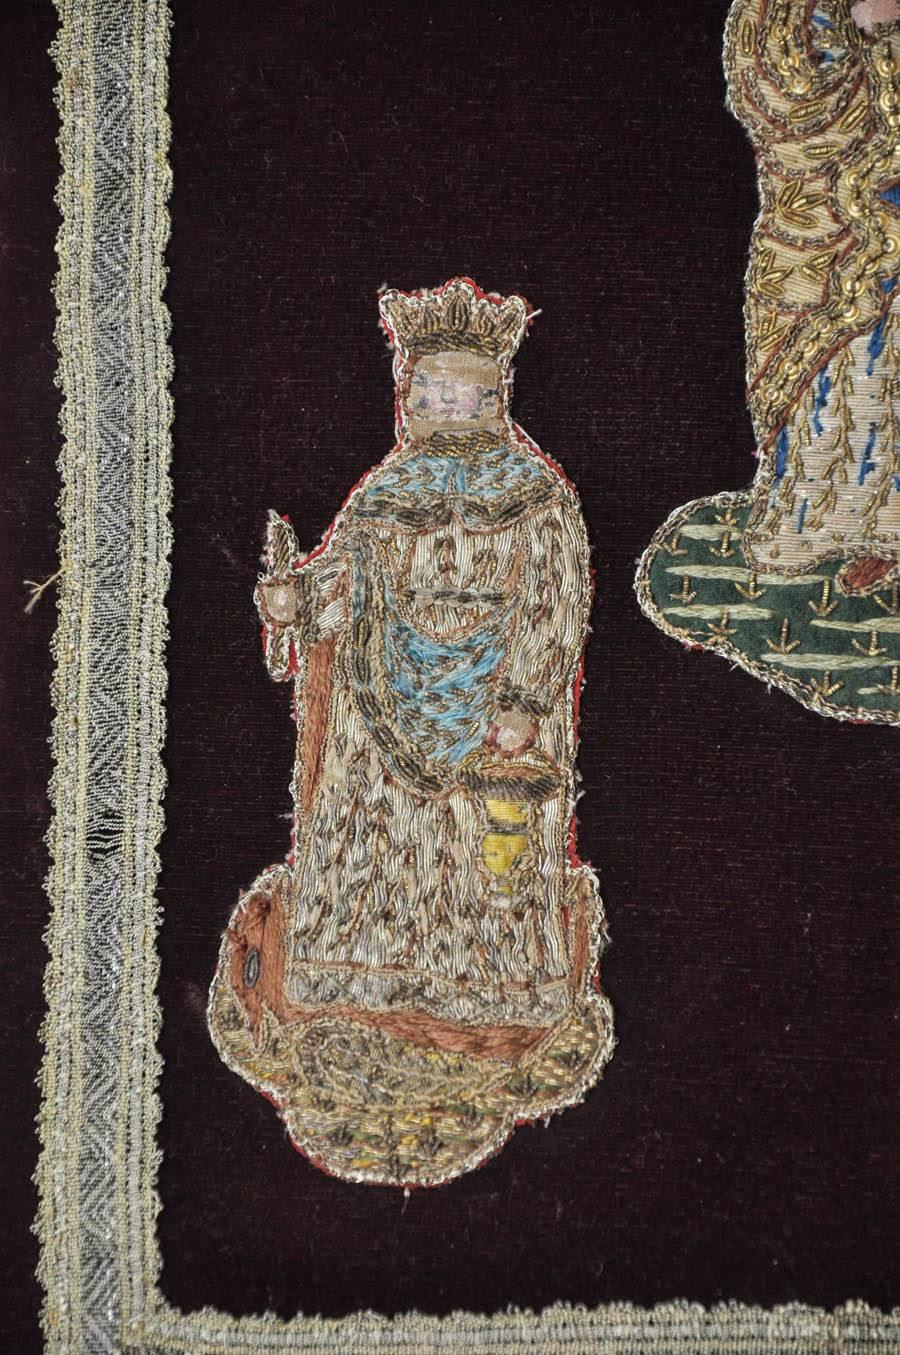 Silk velvet panel depicting three important religious figures fragments from a 18th century vestment with silver-gilt threading.   A crowned Virgin Mary as Queen of Heaven holding the baby Jesus in the center of the panel. On the left is a crowned